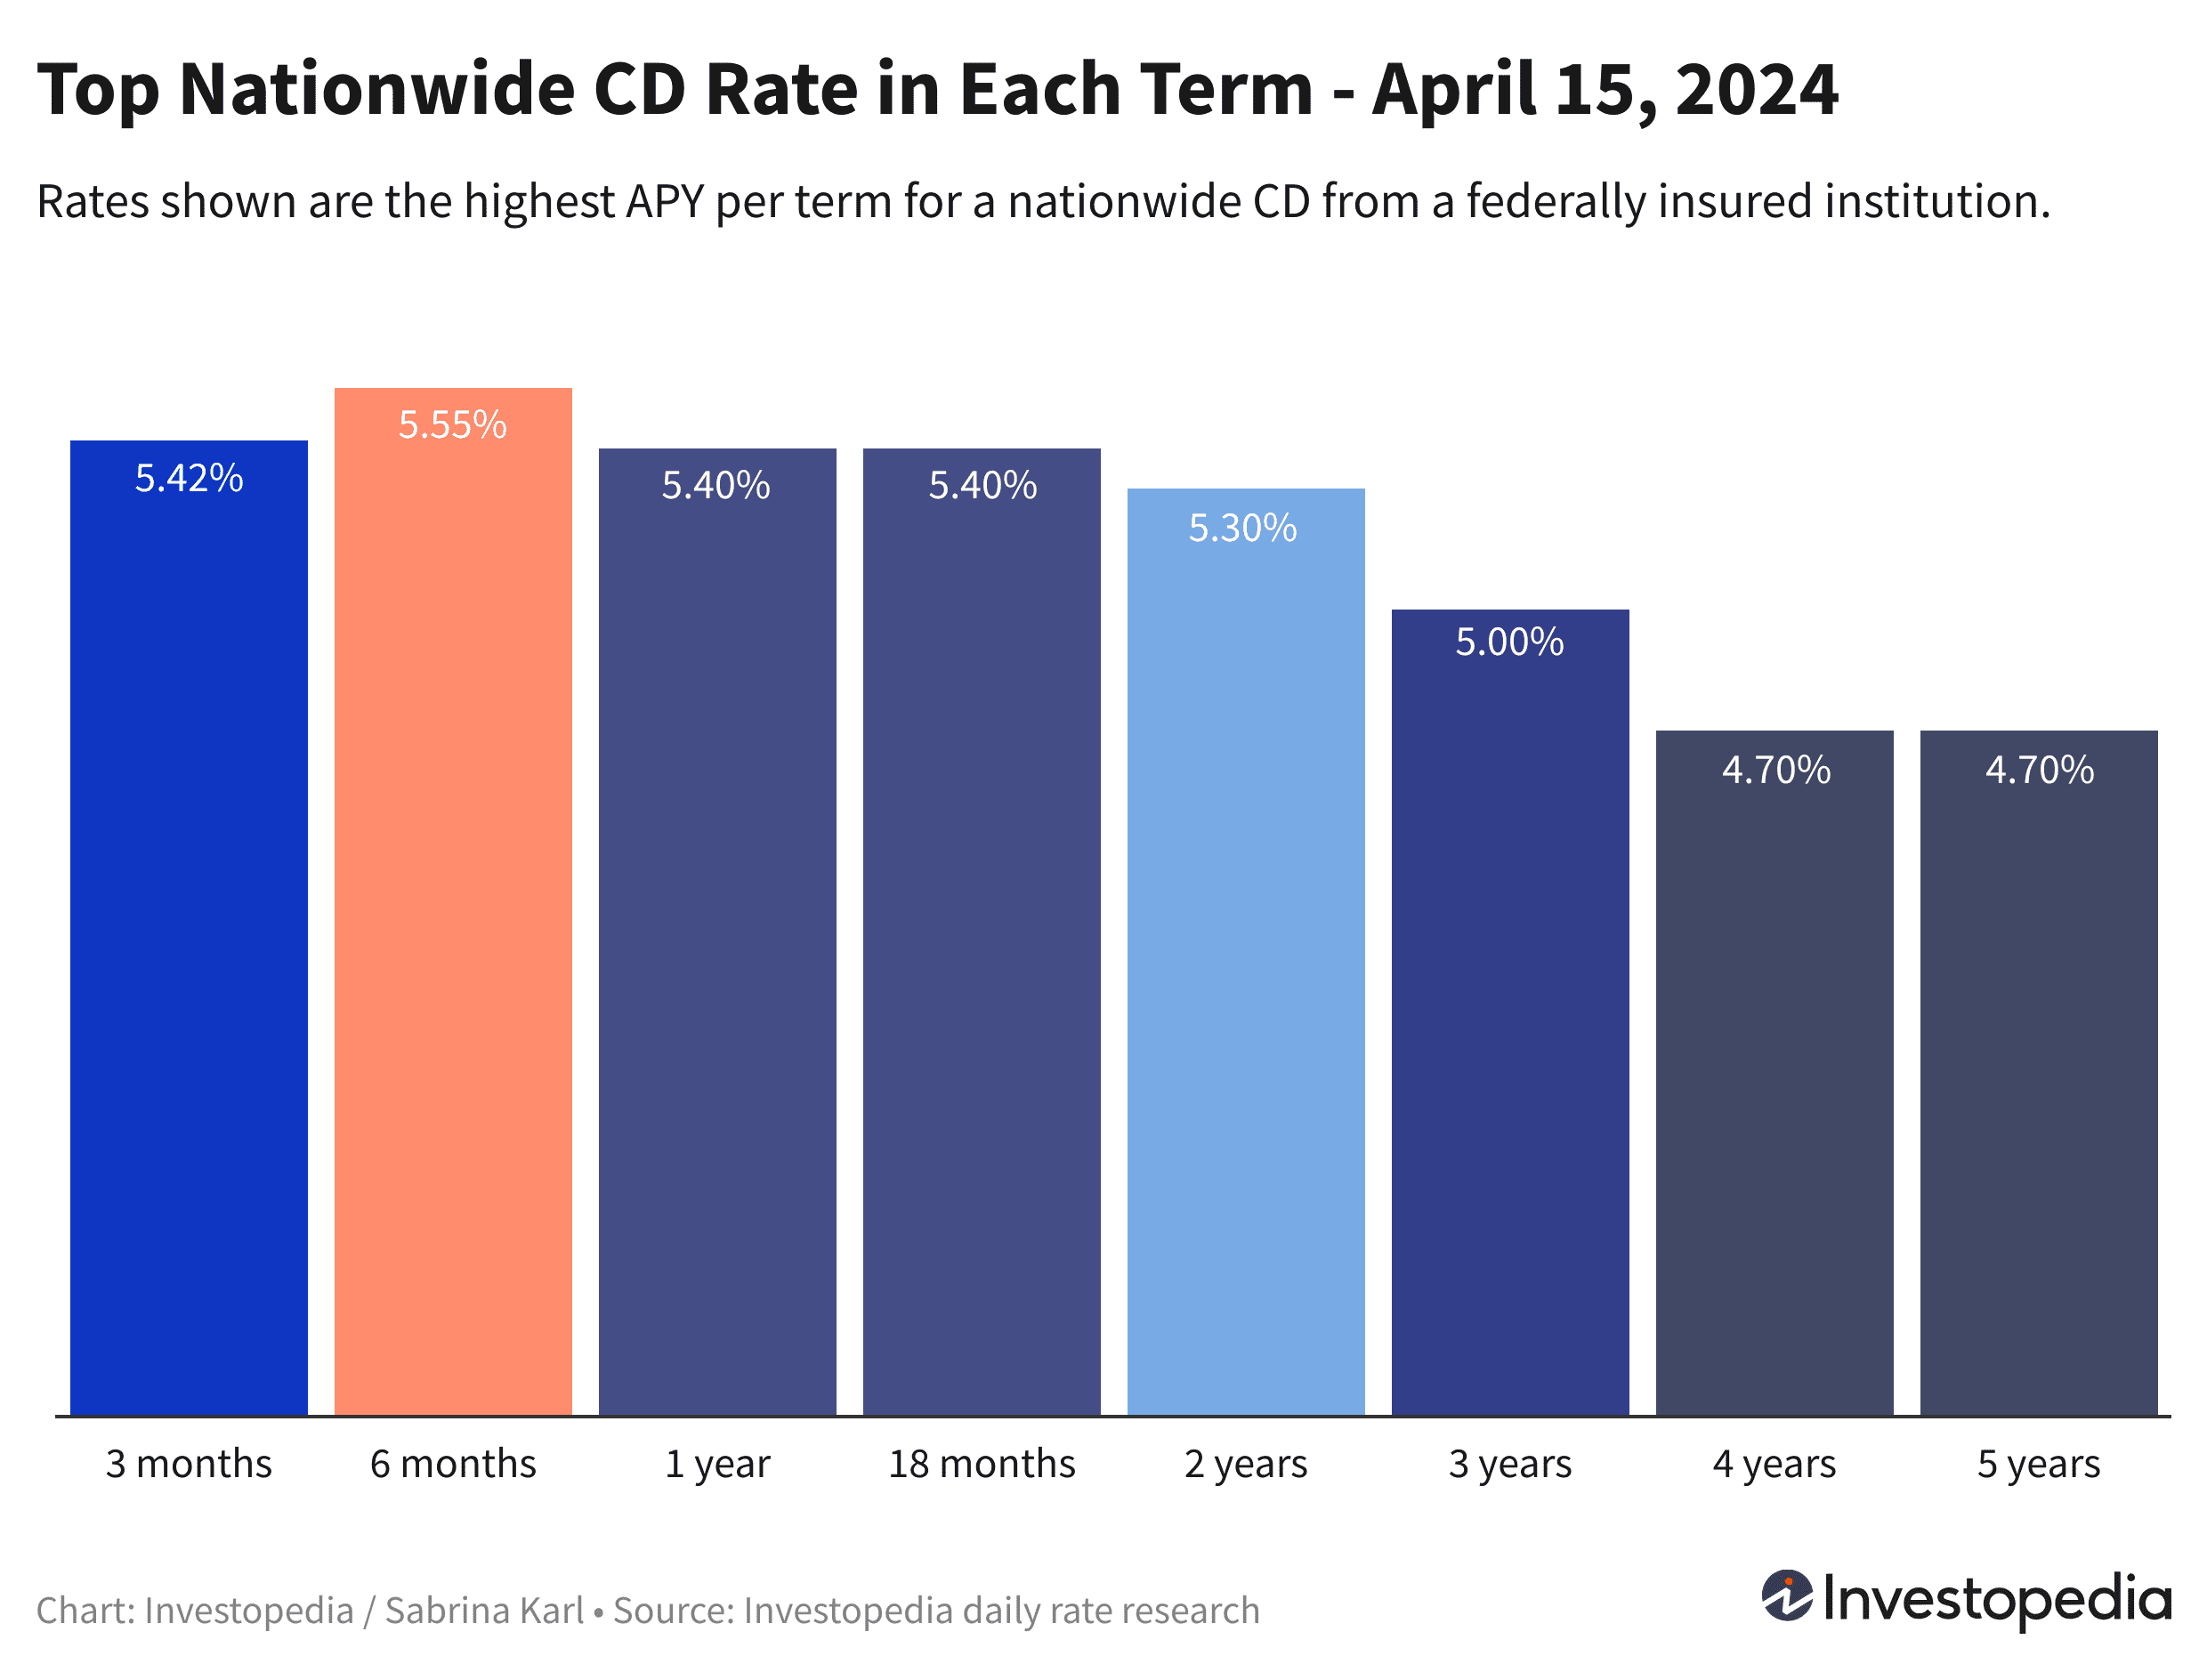 Bar graph showing the top nationally available rate in each CD term, ranging from 4.70% to 5.55% - Rates as of April 15, 2024